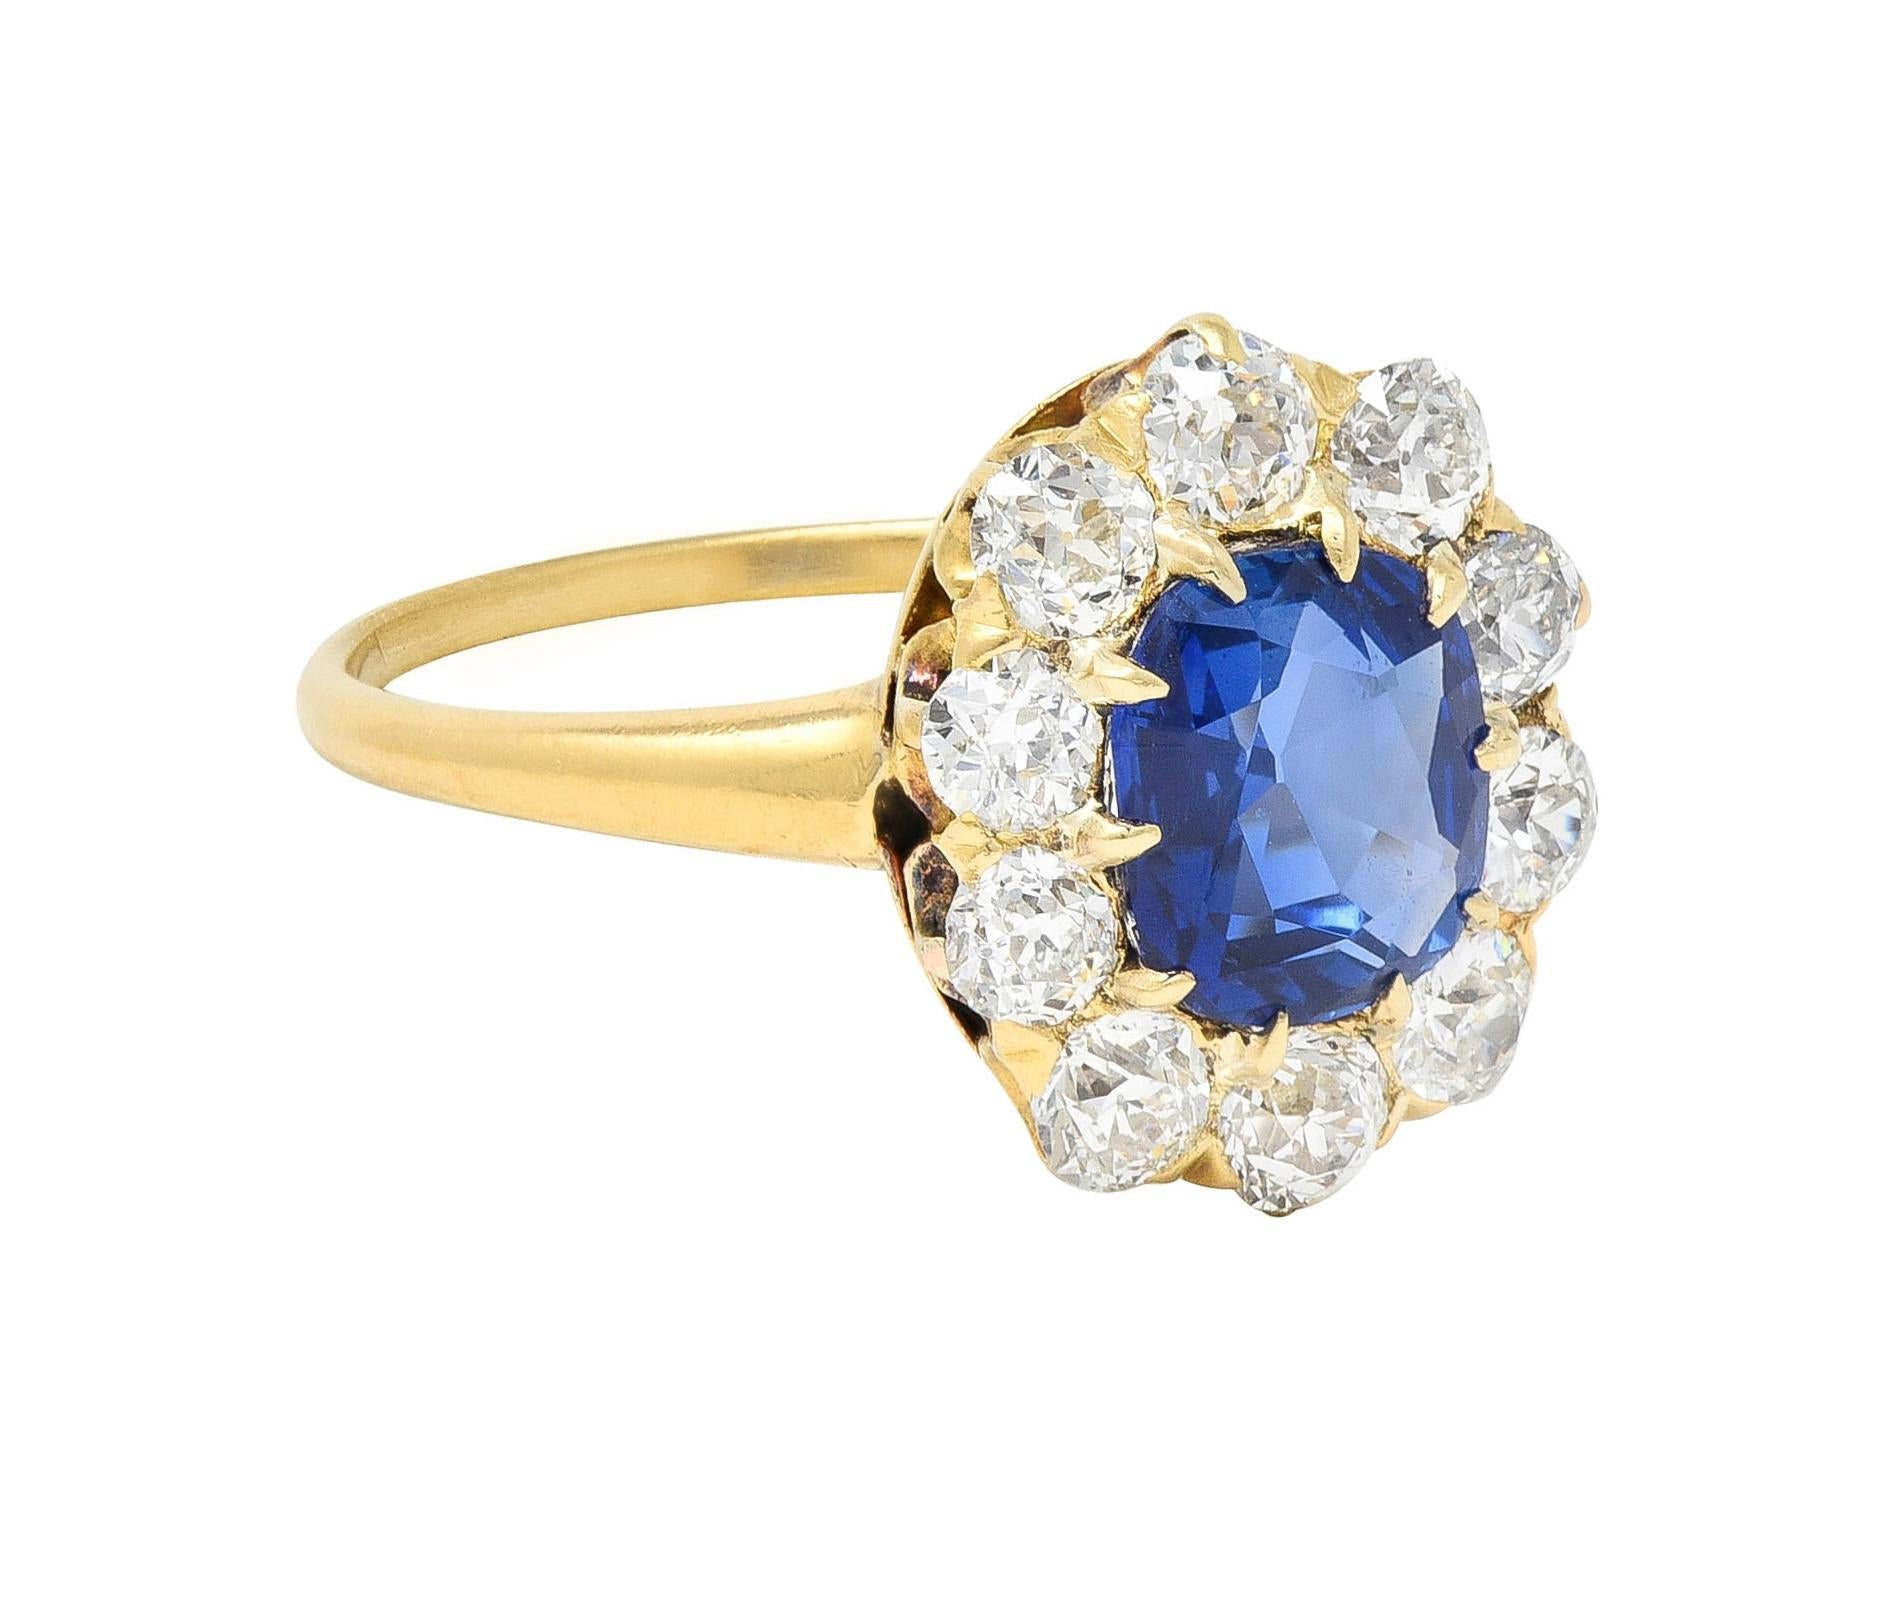 Centering a cushion cut sapphire weighing 1.58 carats - transparent medium blue in color 
Natural Kashmir in origin and displaying no indications of heat treatment
Set by talon prongs with a halo surround of old European cut diamonds
Weighing